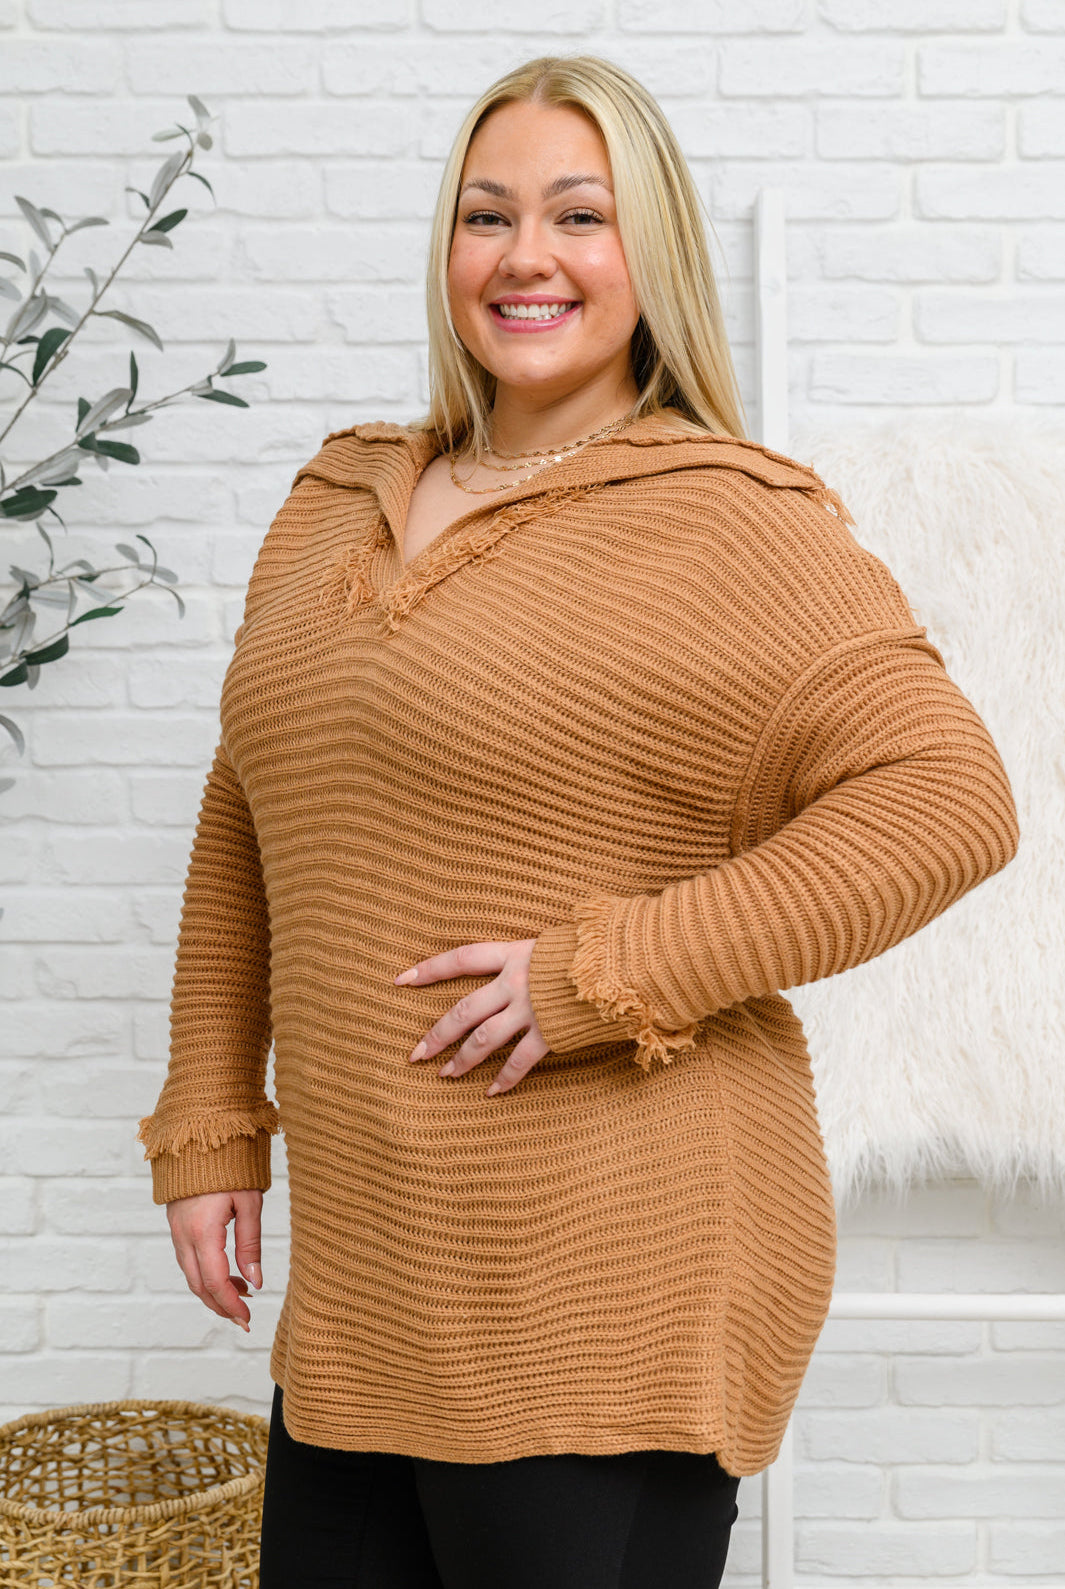 Travel Far & Wide Sweater in Taupe-Sweaters- Simply Simpson's Boutique is a Women's Online Fashion Boutique Located in Jupiter, Florida